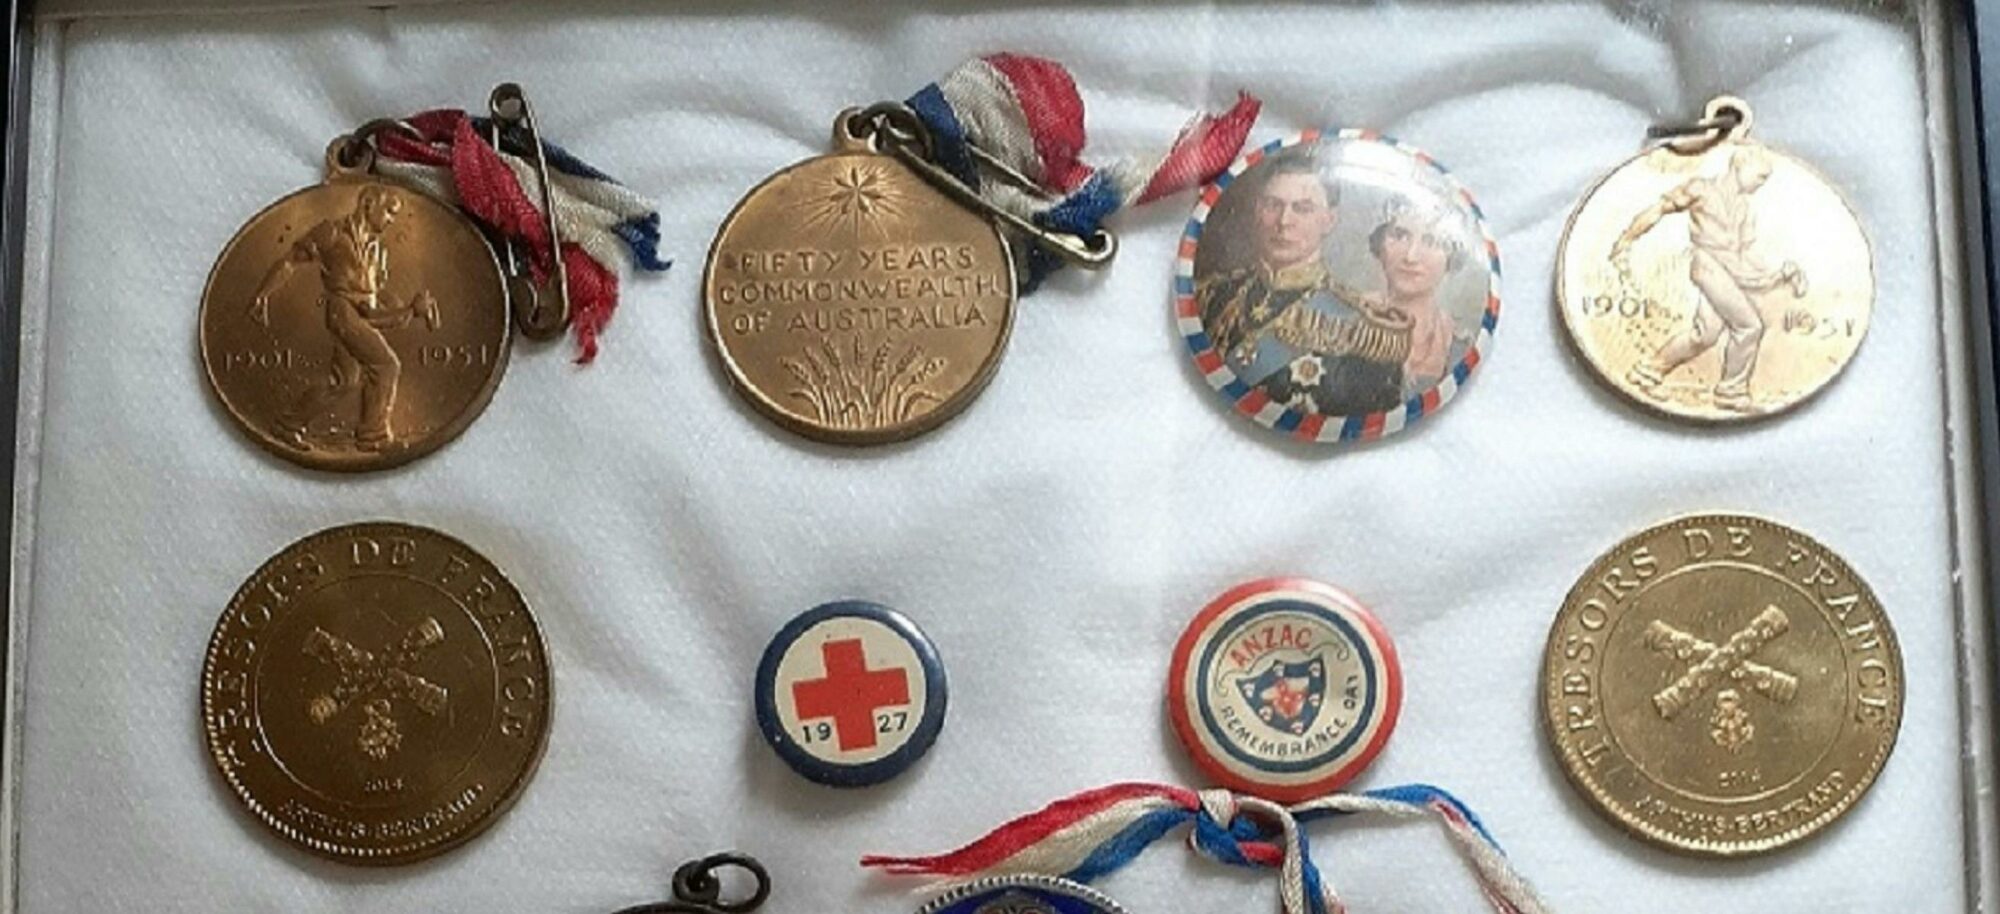 Donated Medals